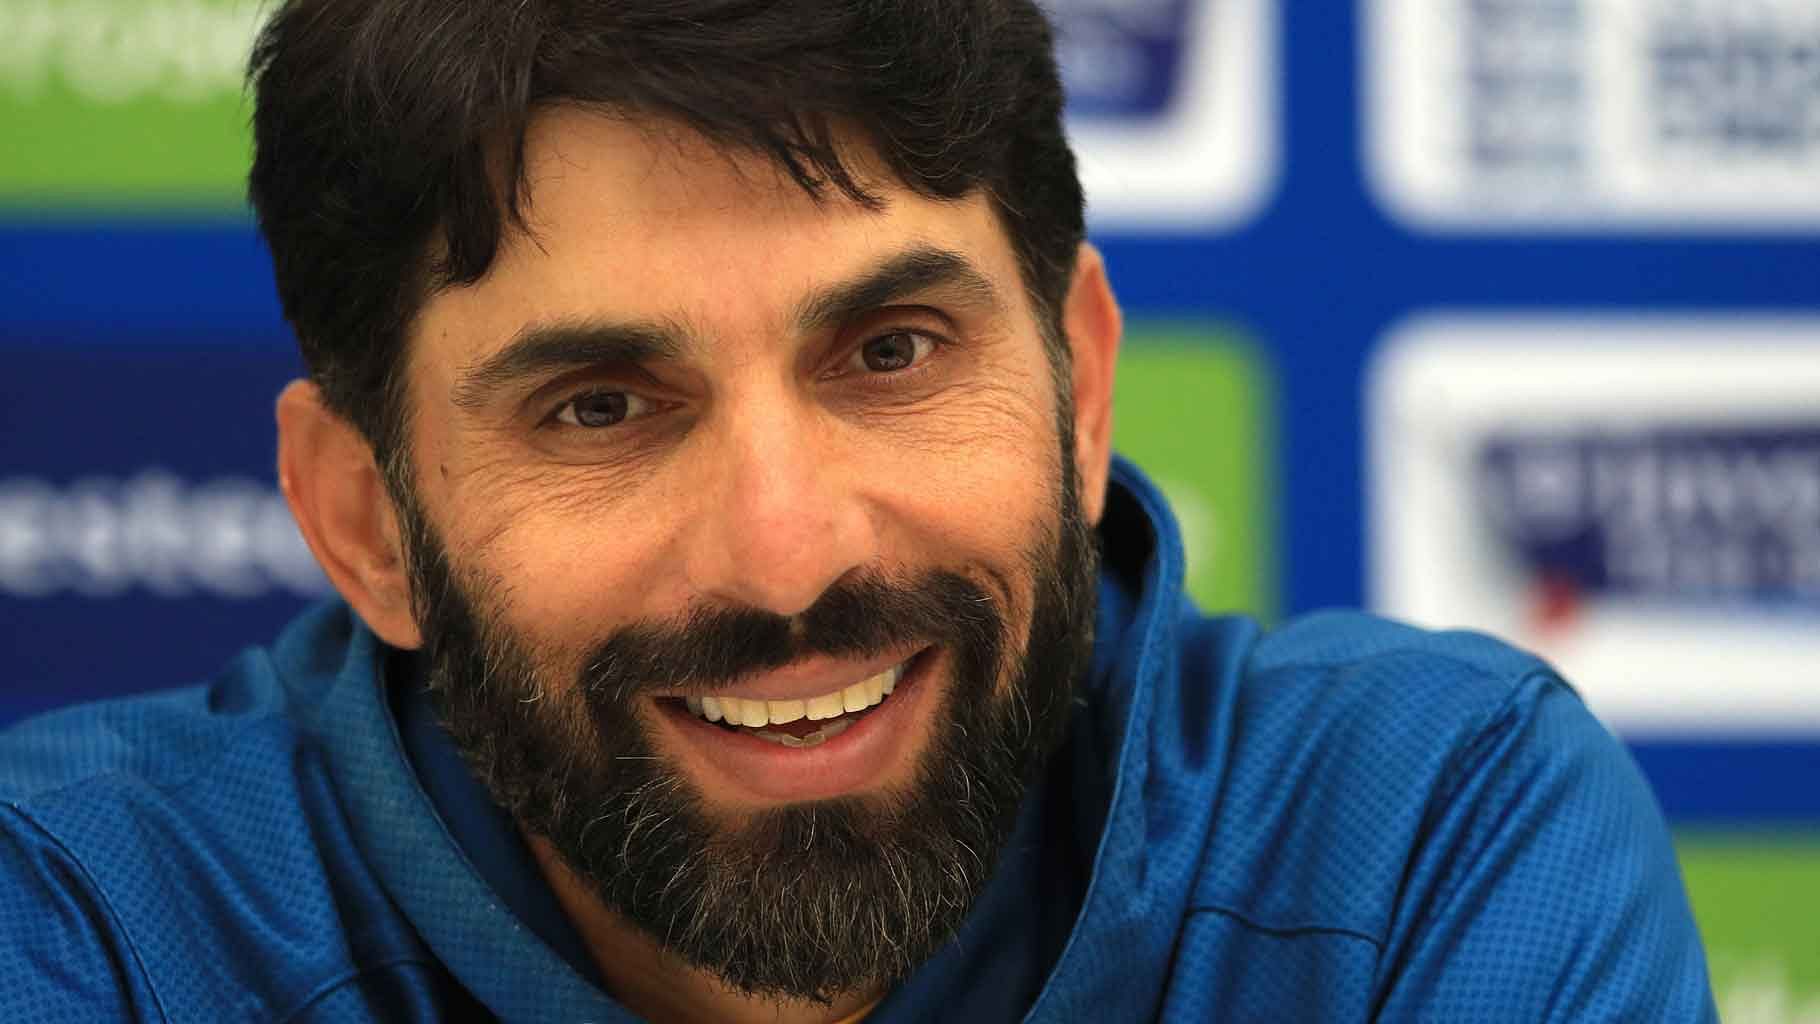 Pakistan head coach Misbah-ul-Haq feels 2019 has been a tough year for the country in Test cricket with their struggles against South Africa and Australia on the road, and has highlighted the need to improve performance.